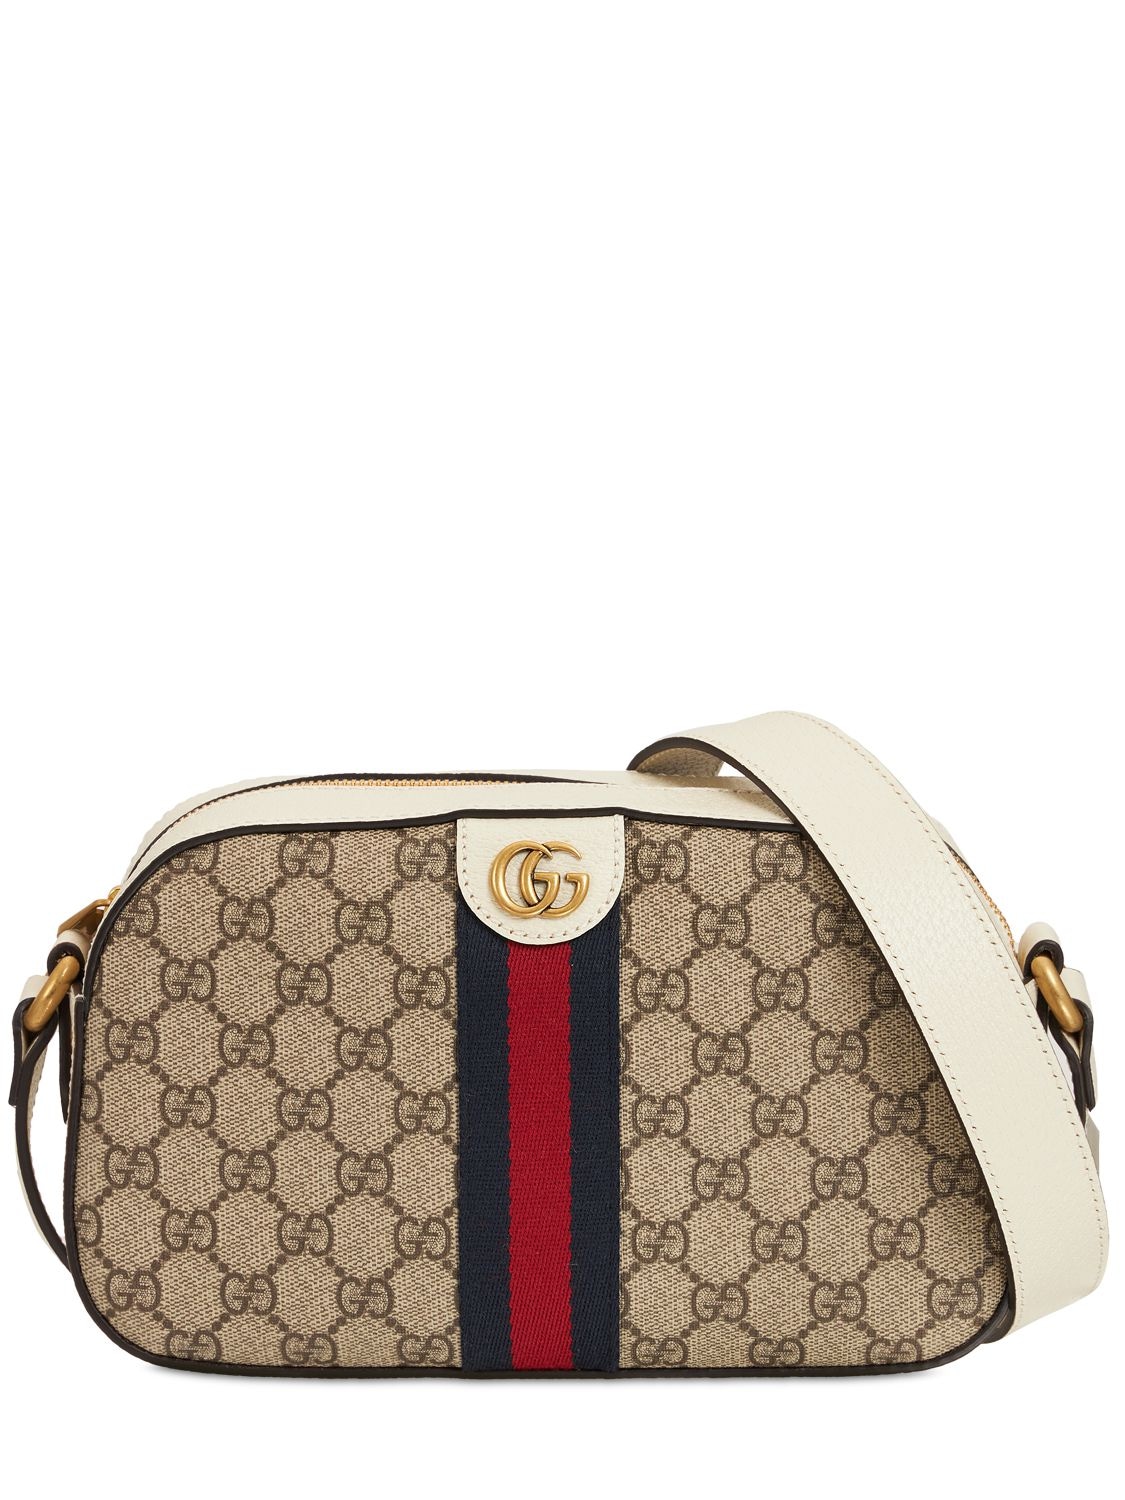 GUCCI Ophidia Gg Canvas Camera Bag for Men